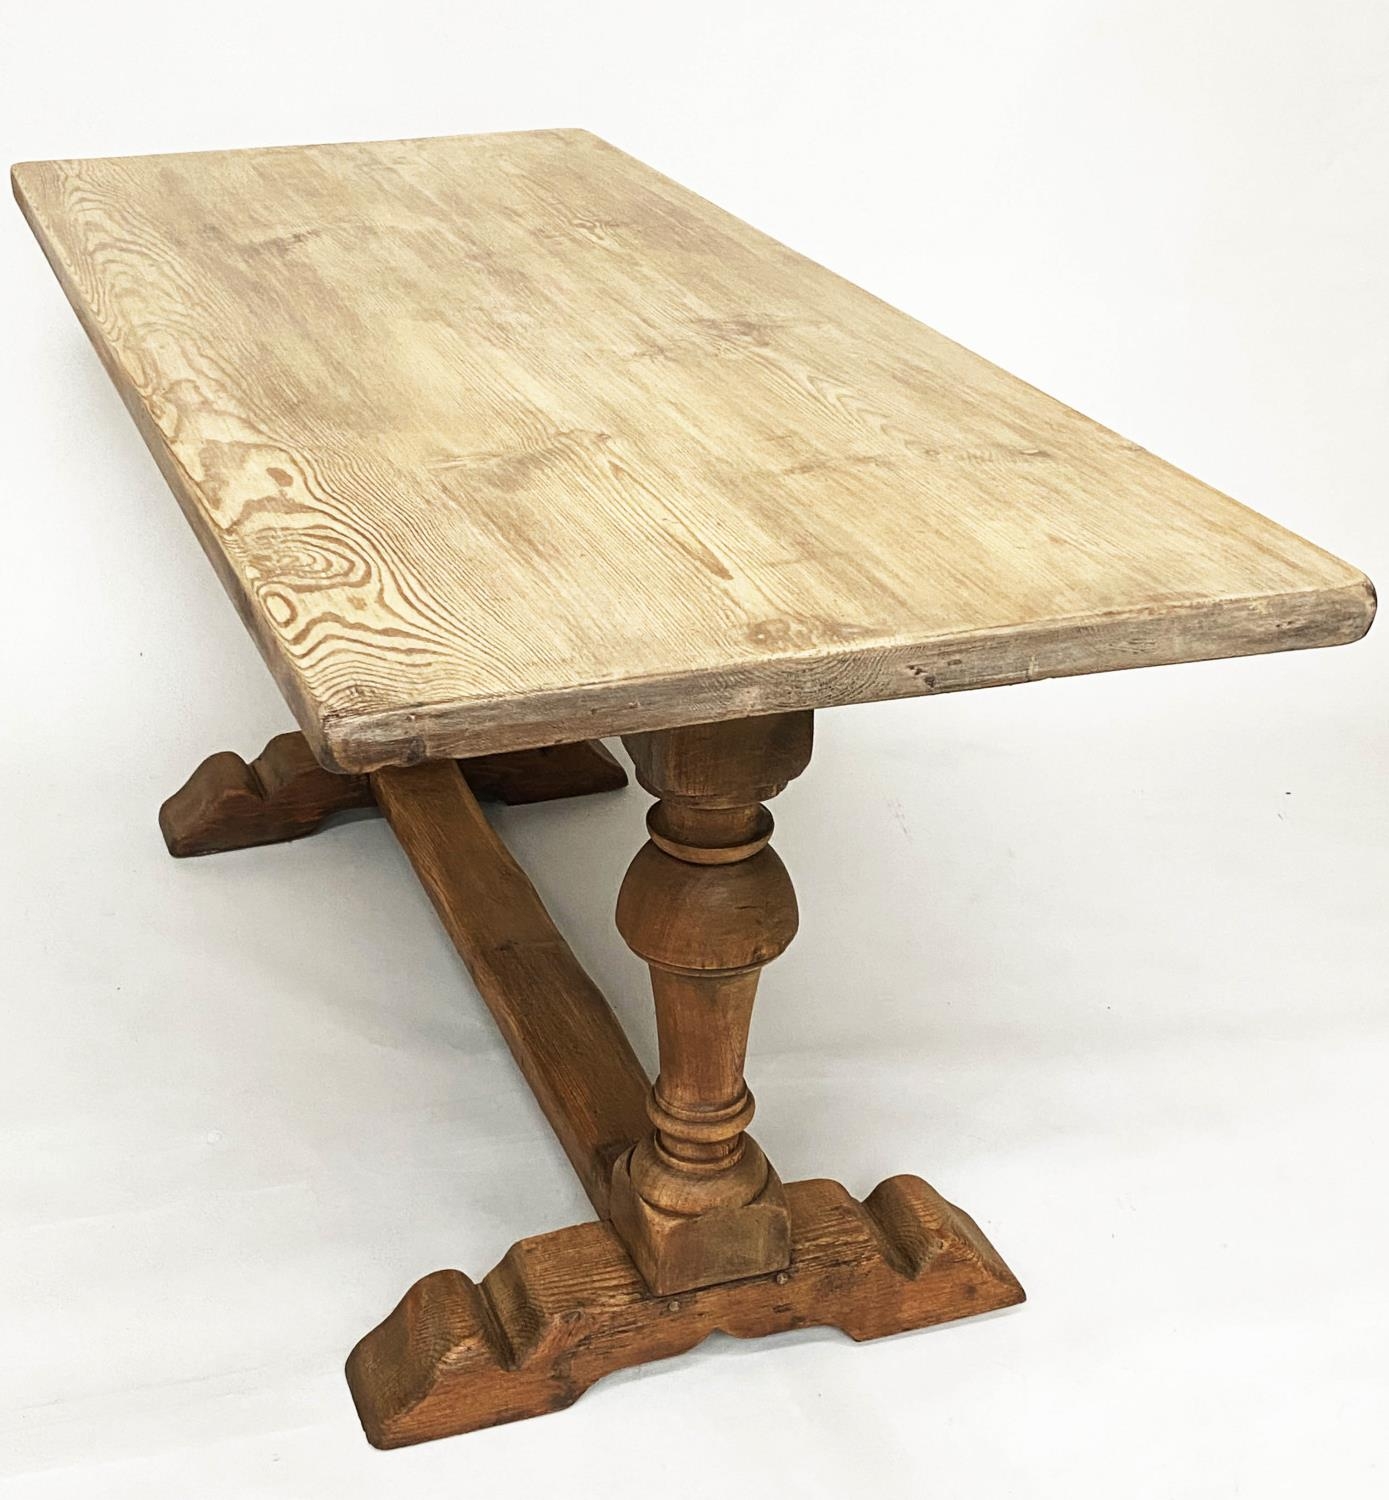 REFECTORY TABLE, 17th century style pine, rectangular with cup and cover supports, 165cm H x 71cm - Image 2 of 10